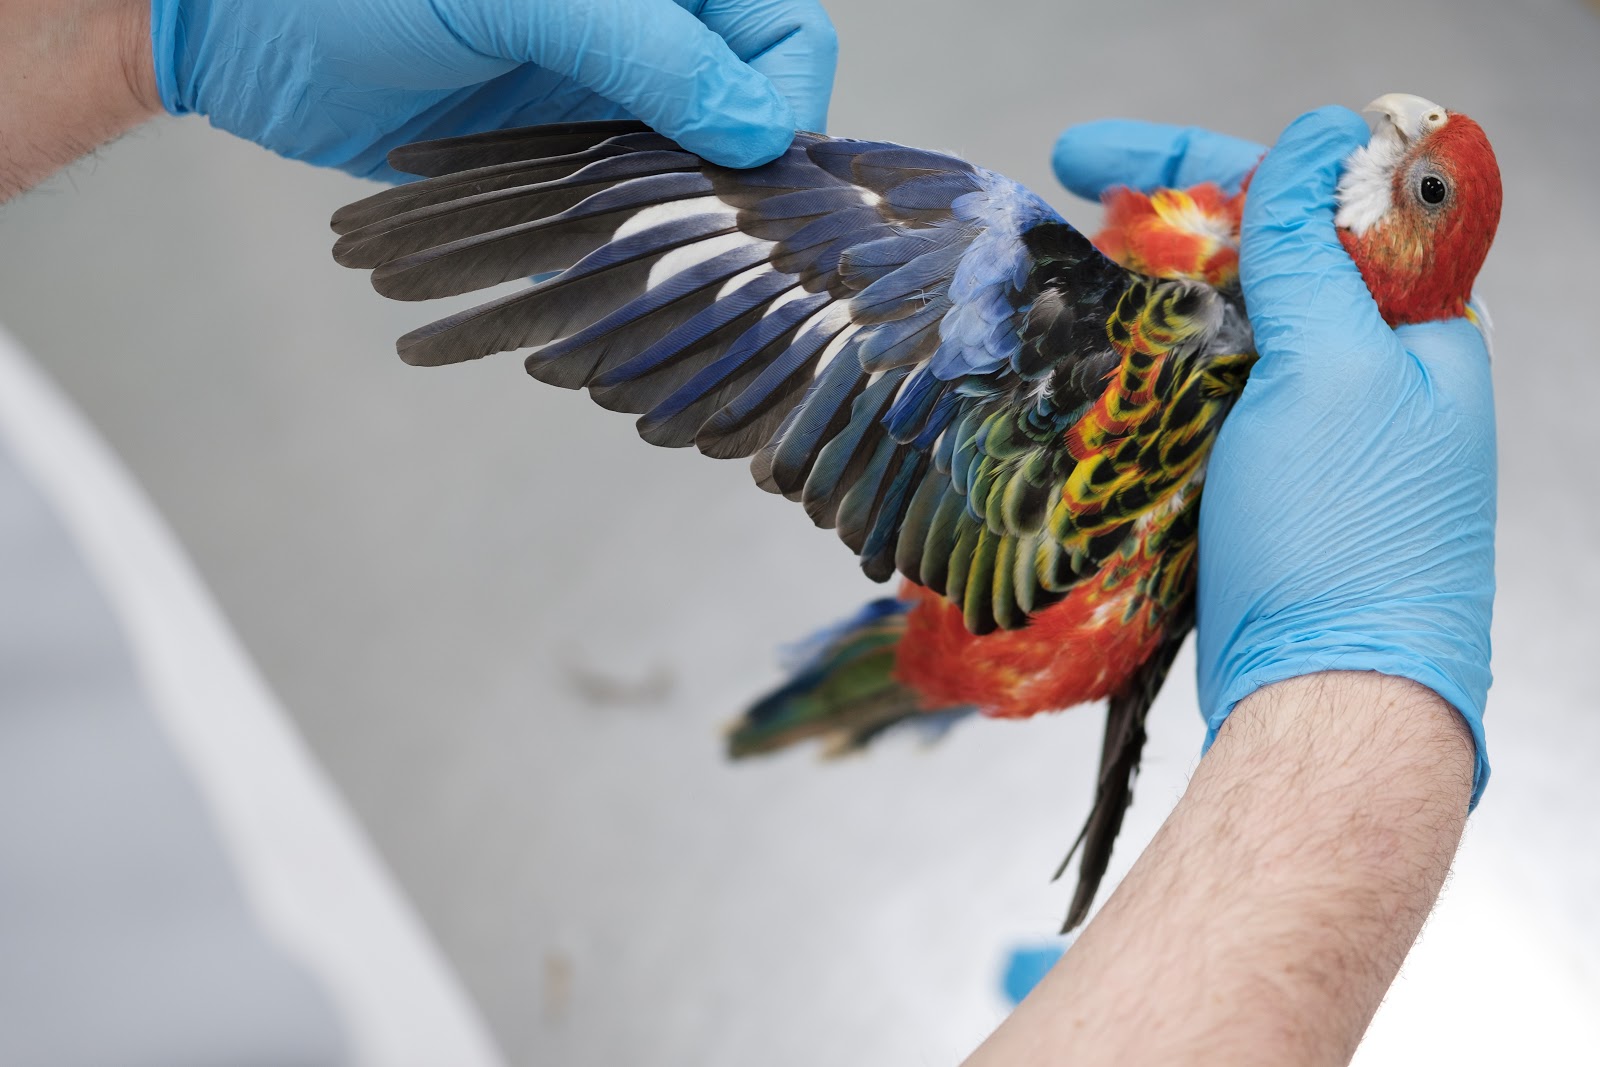 Corella parrot in vet's hands showing extended wing.